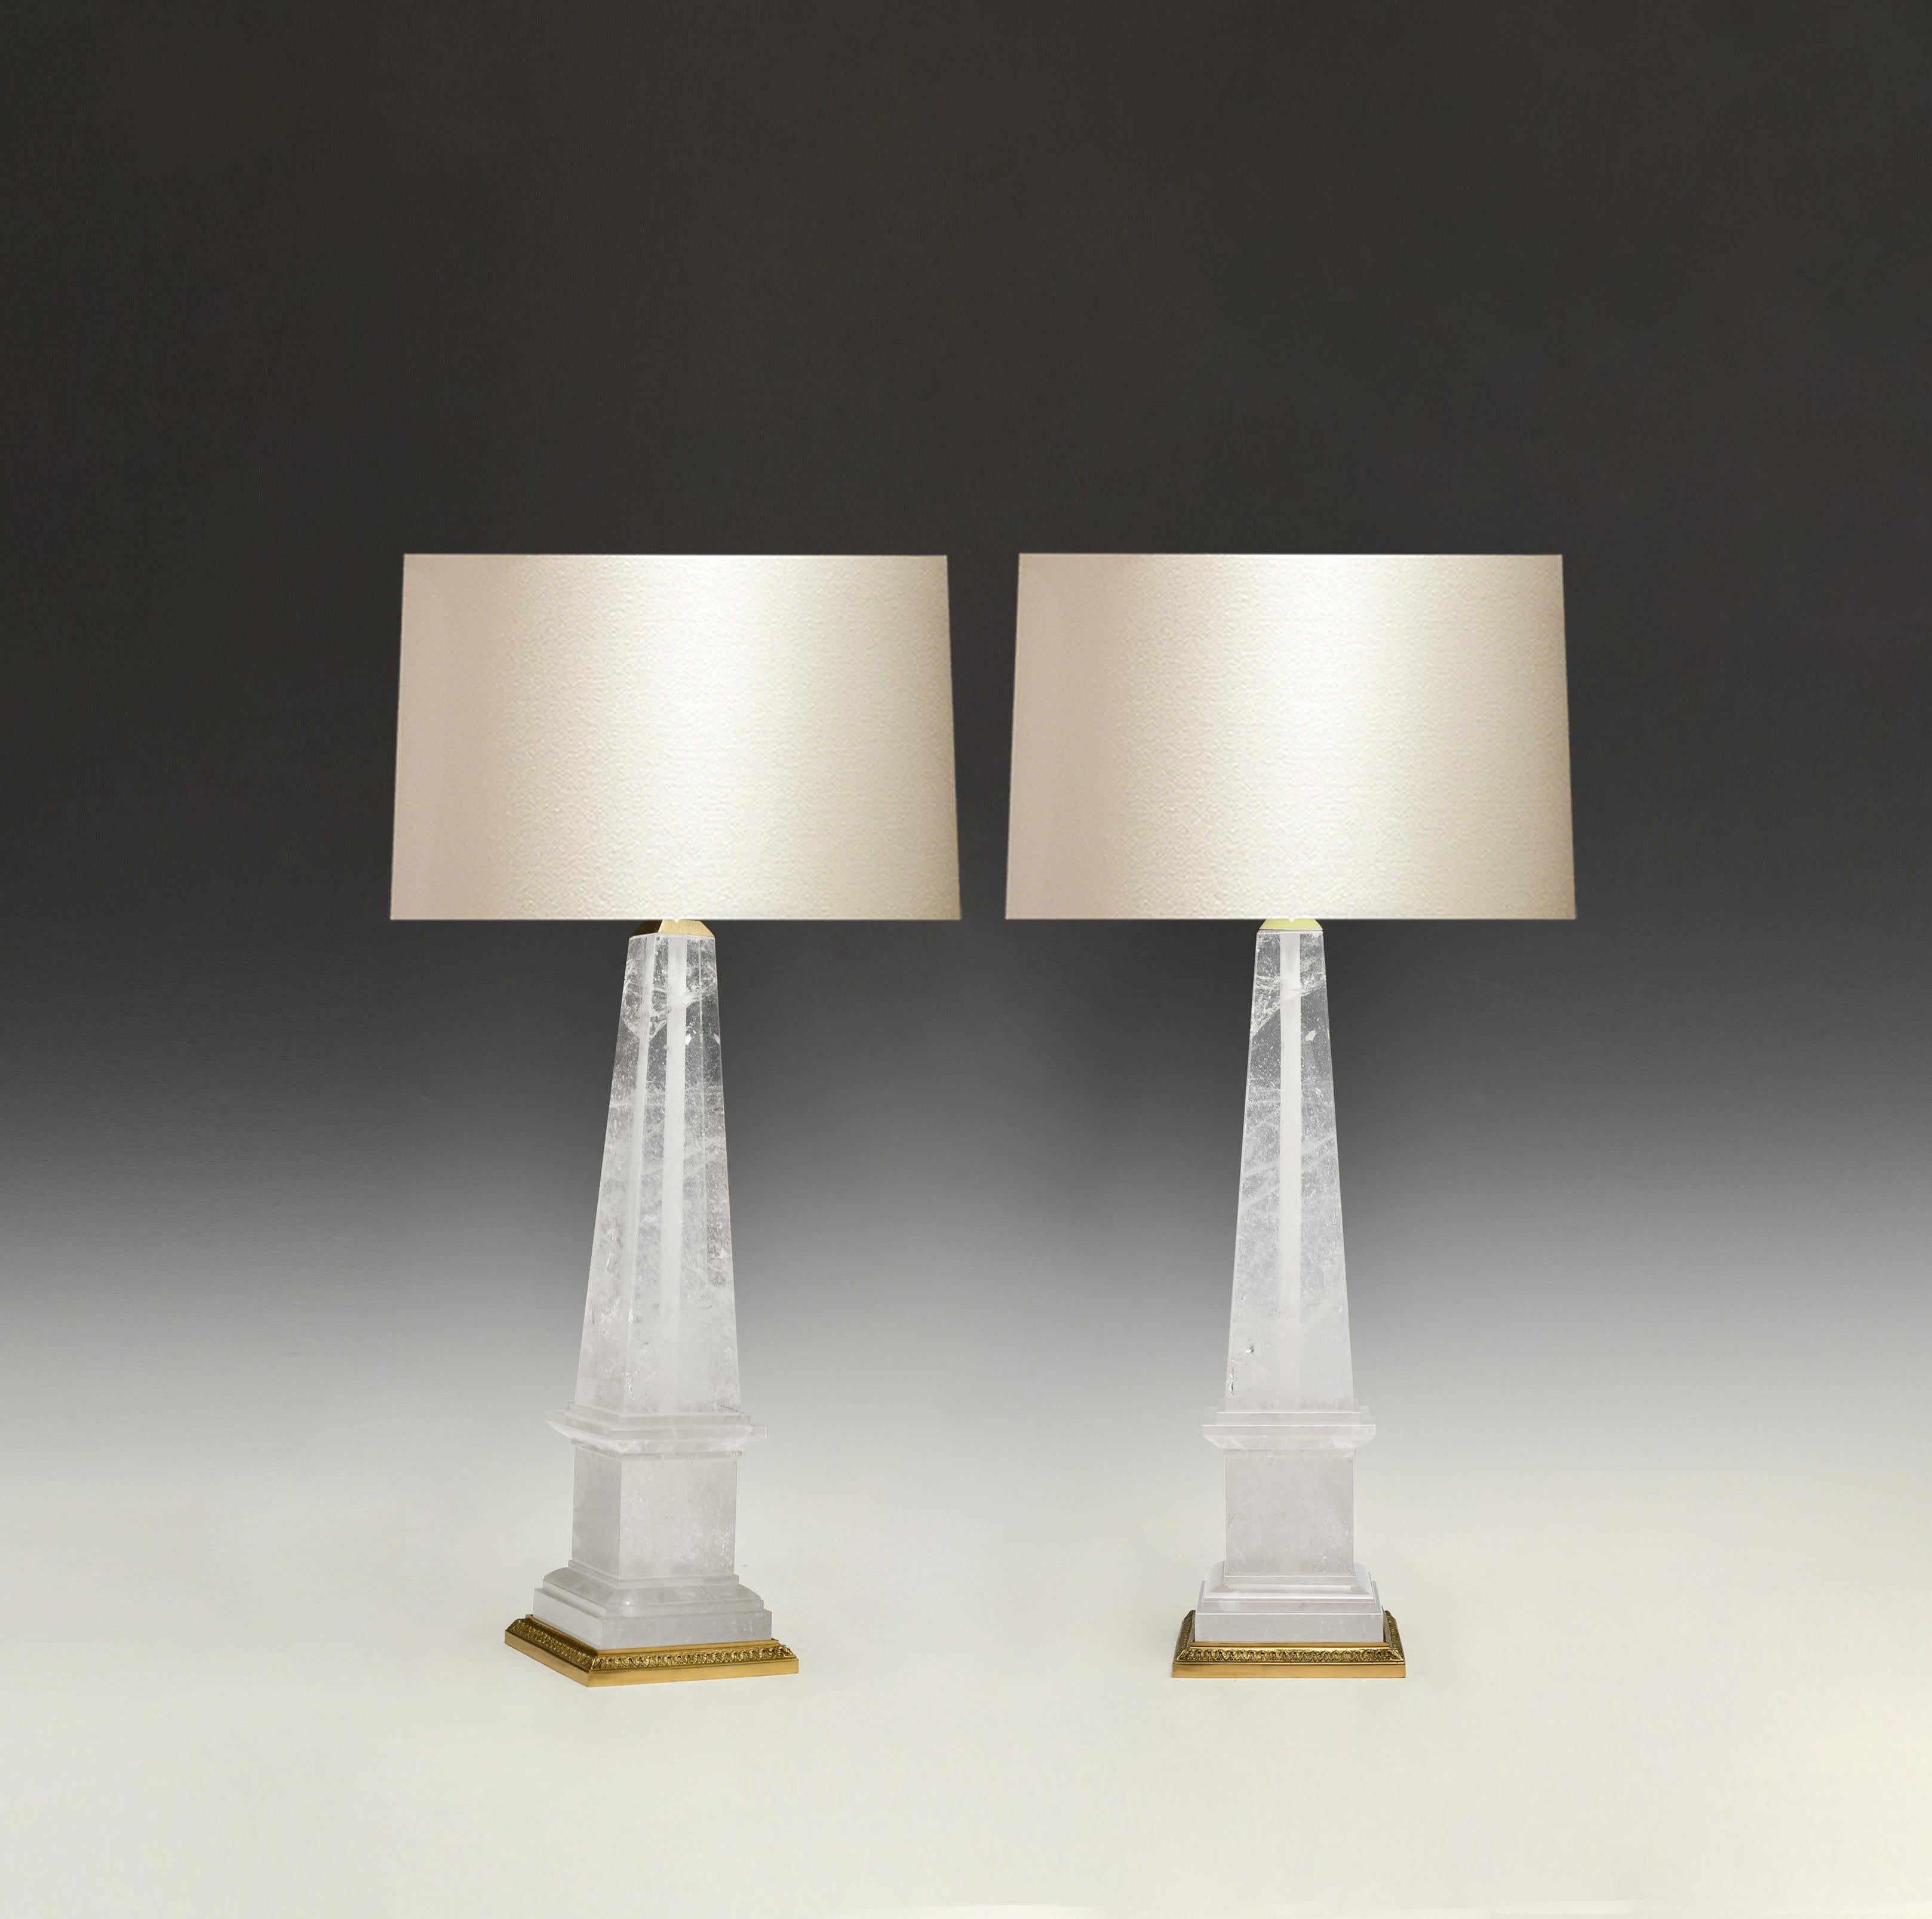 Pair of obelisk rock crystal lamps with fine castled polish brass bases. Created by Phoenix Gallery.
Each lamp installs two sockets.
To the top of the rock crystal: 17